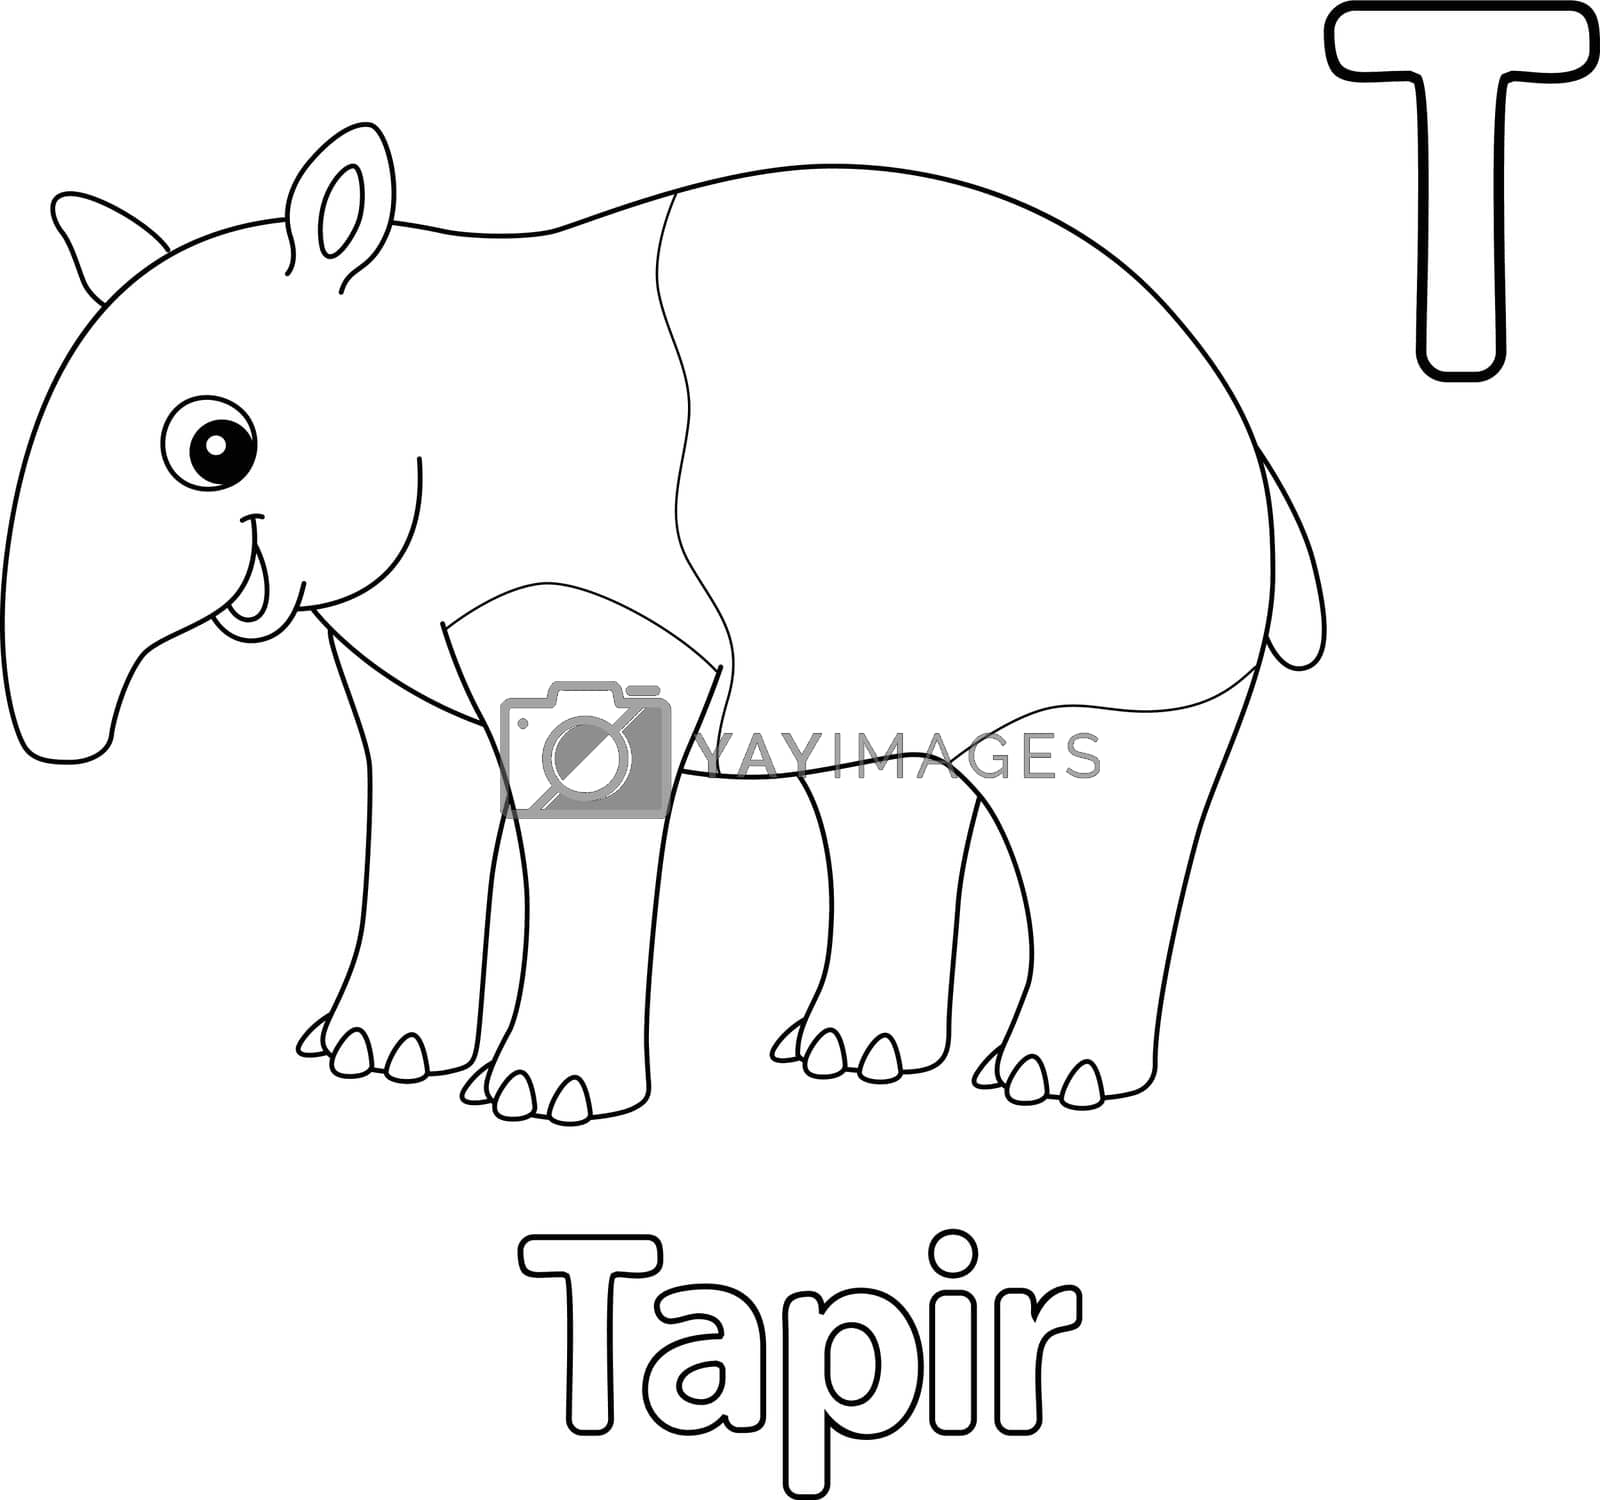 Royalty free image of Tapir Animal Alphabet ABC Isolated Coloring Page T by abbydesign